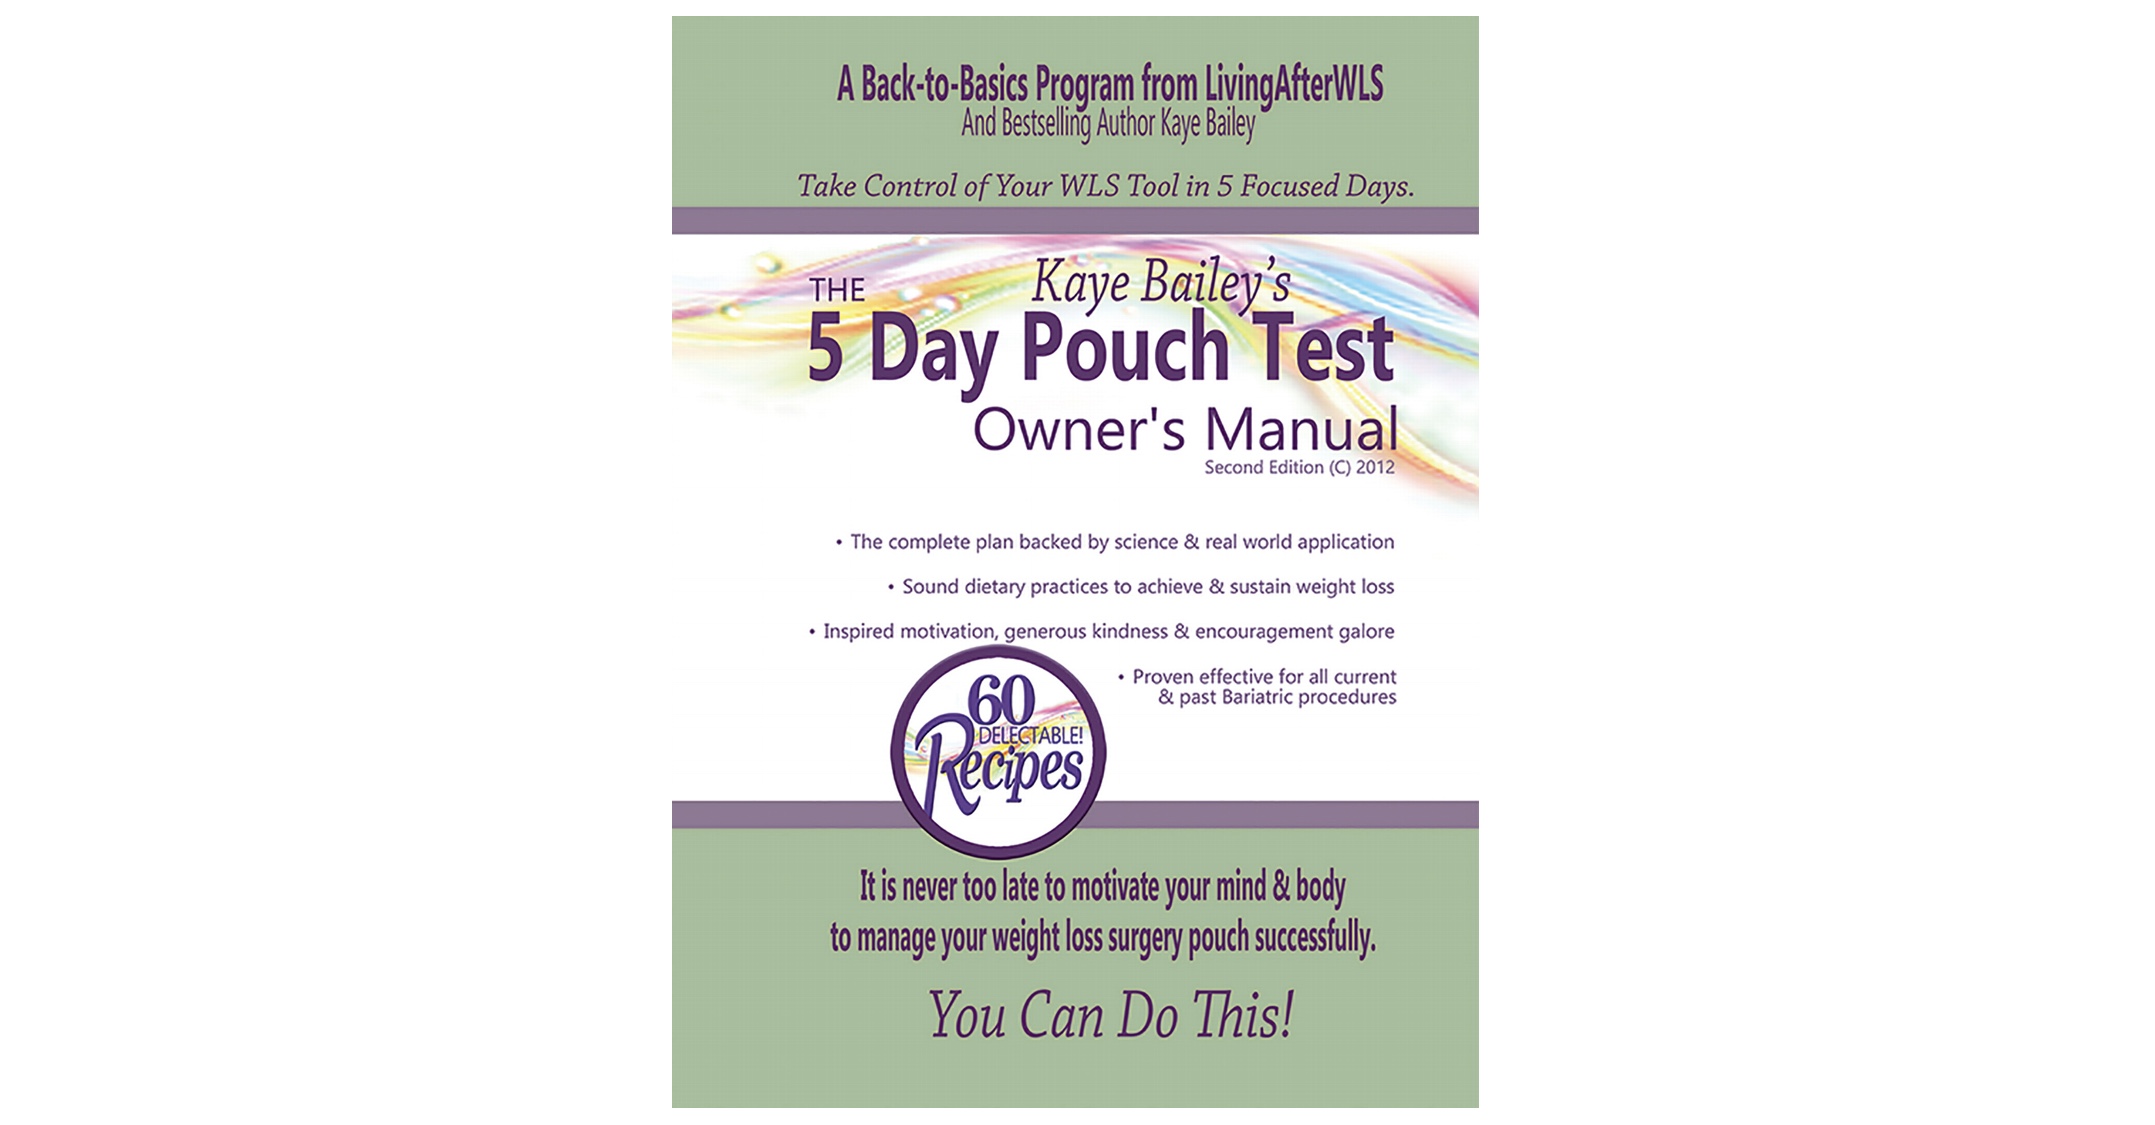 melissa-does-the-5-day-pouch-test-part-two-melissa-loses-it